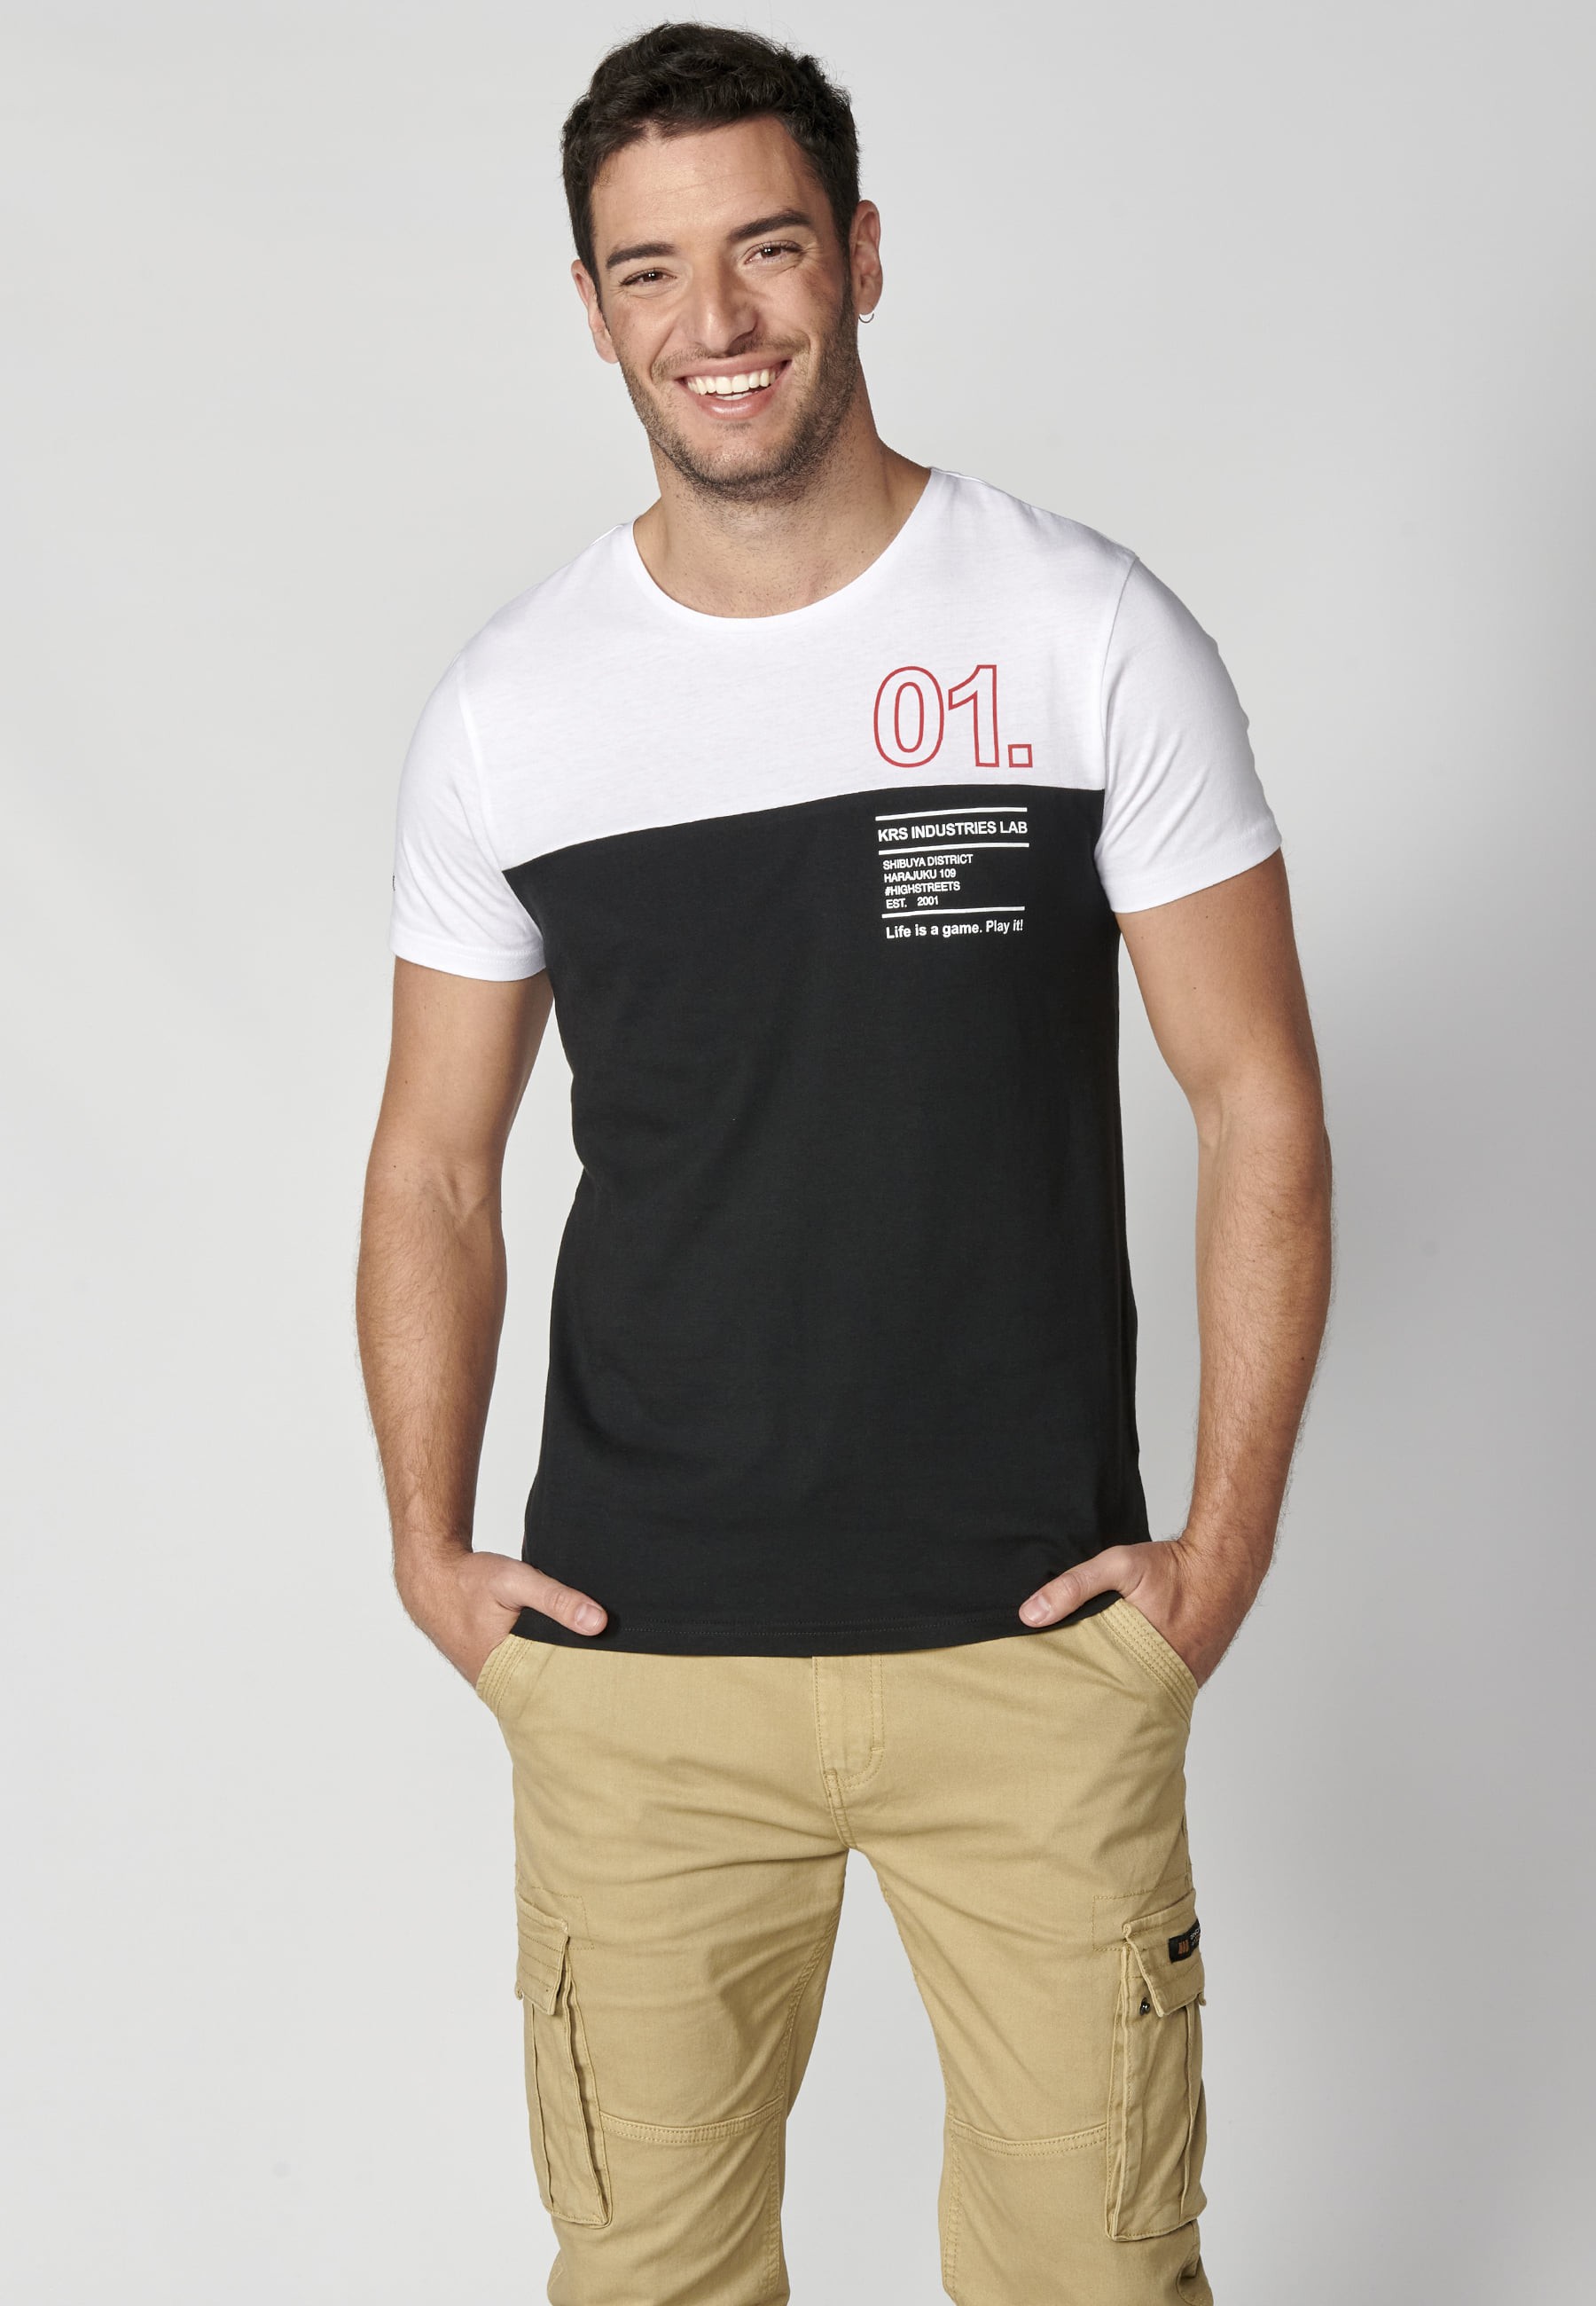 White short-sleeved Cotton T-shirt with text on the chest for Men